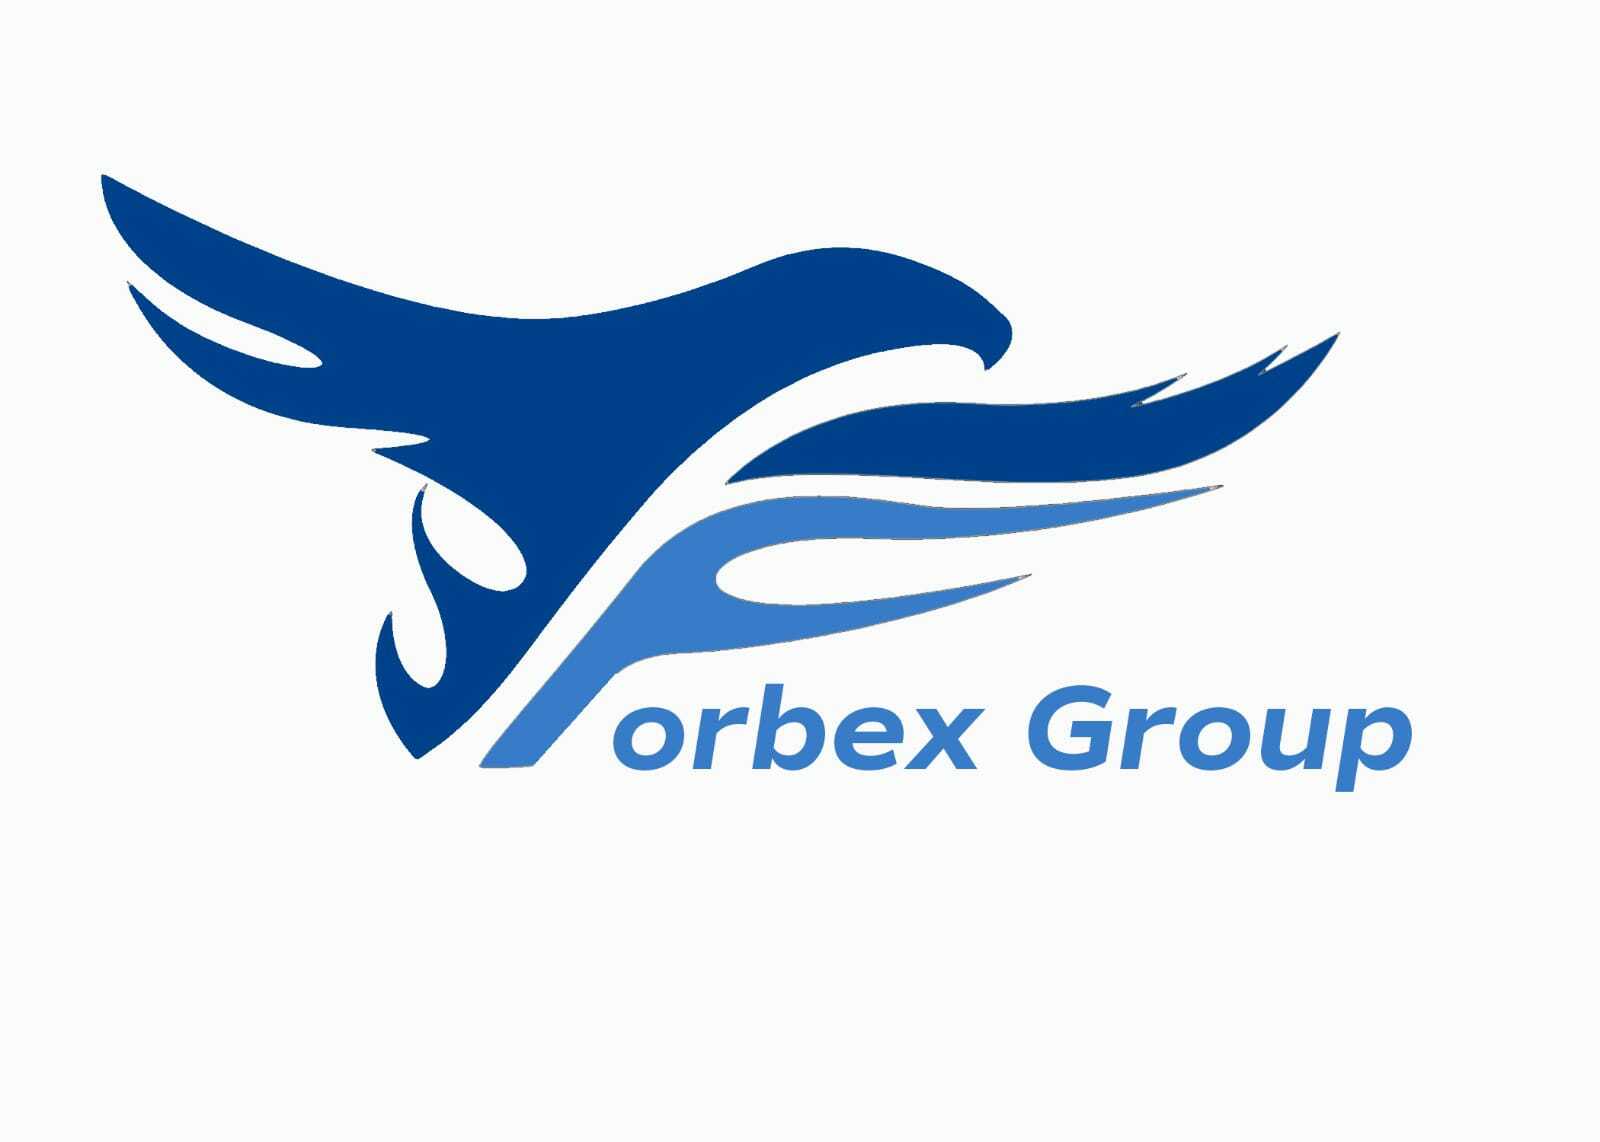 The ForBex Group's logo